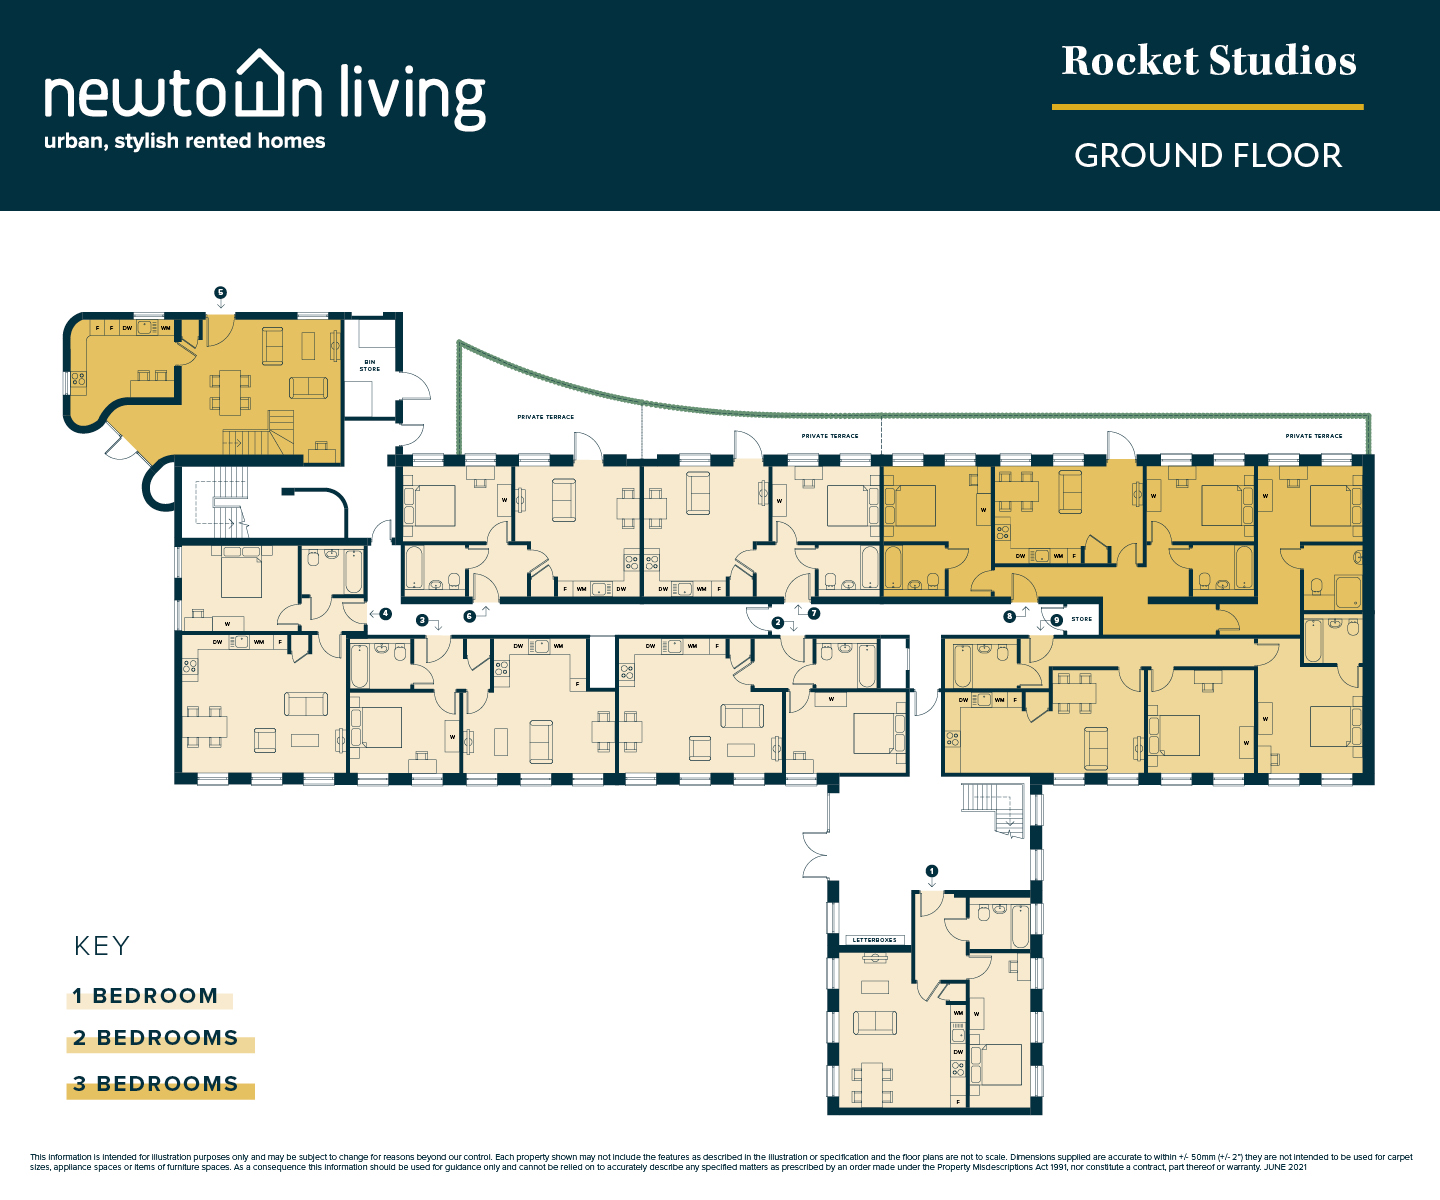 Apartments to Rent by Newton Living at Rocket Studios, Leicester, LE4, development floor plan